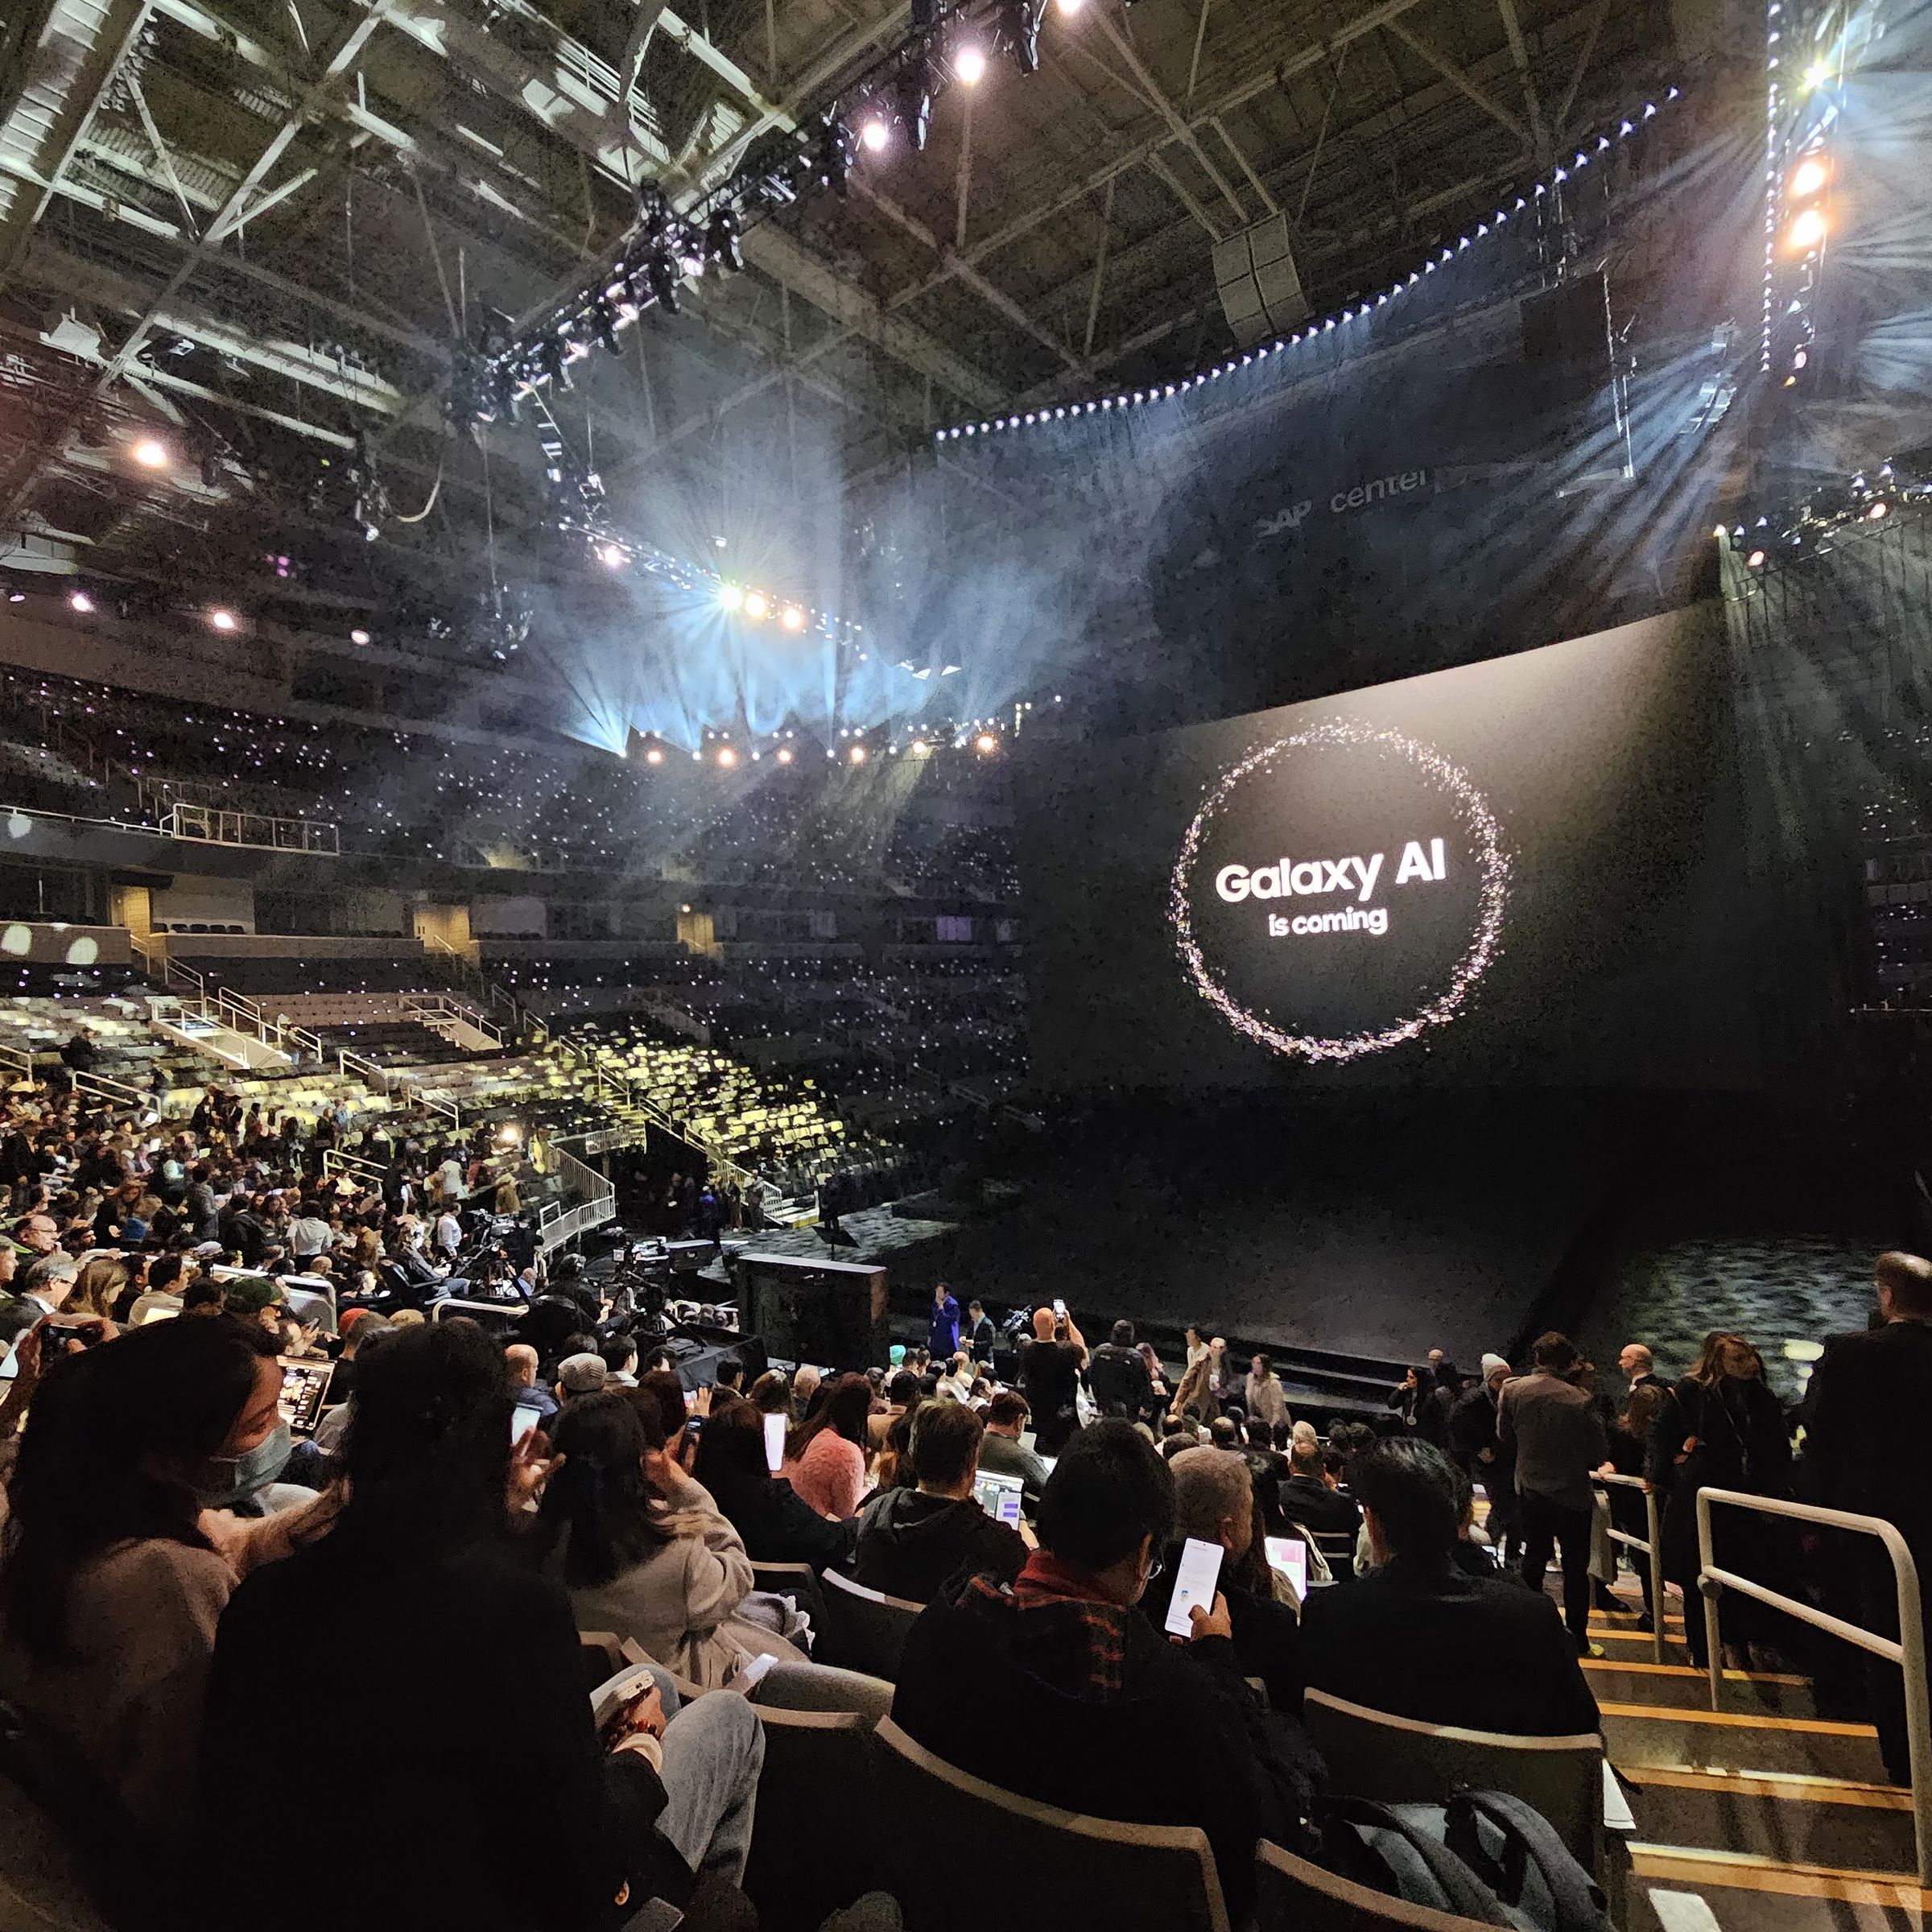 Image of arena with Unpacked presentation on screen.